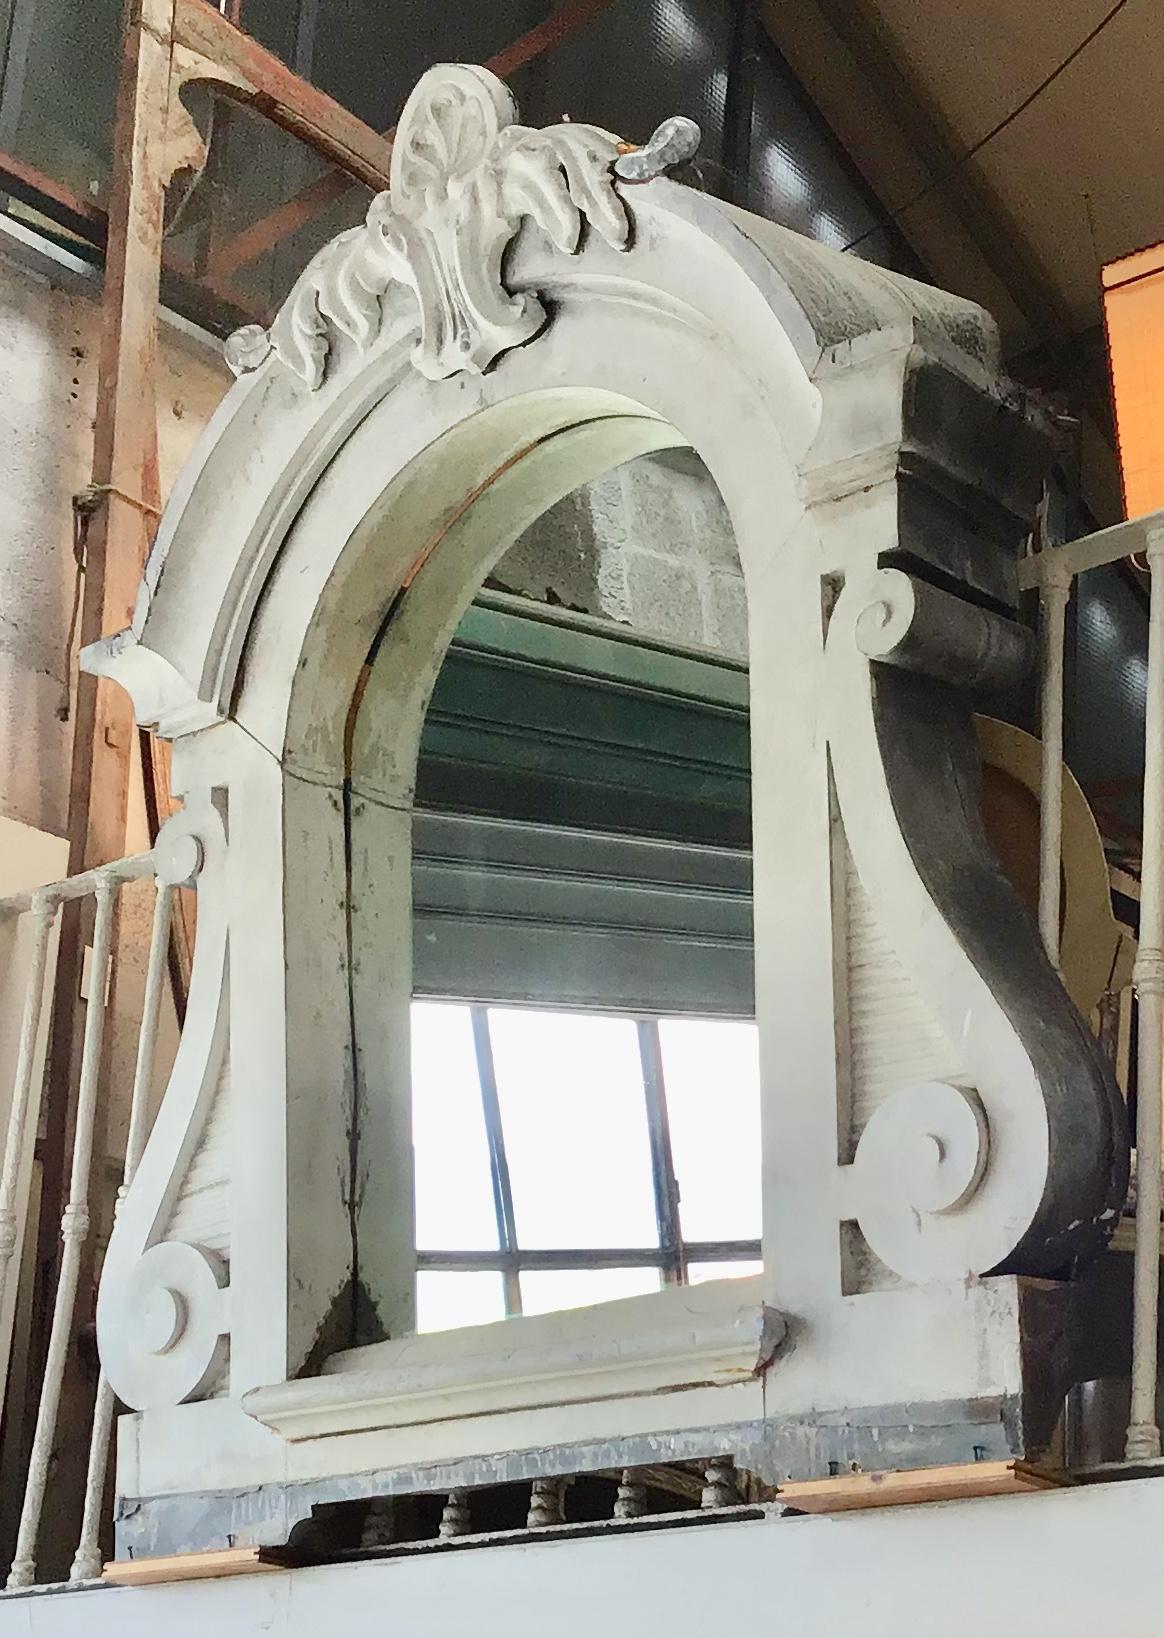 French architectural zinc dormer mirror from 19th century.